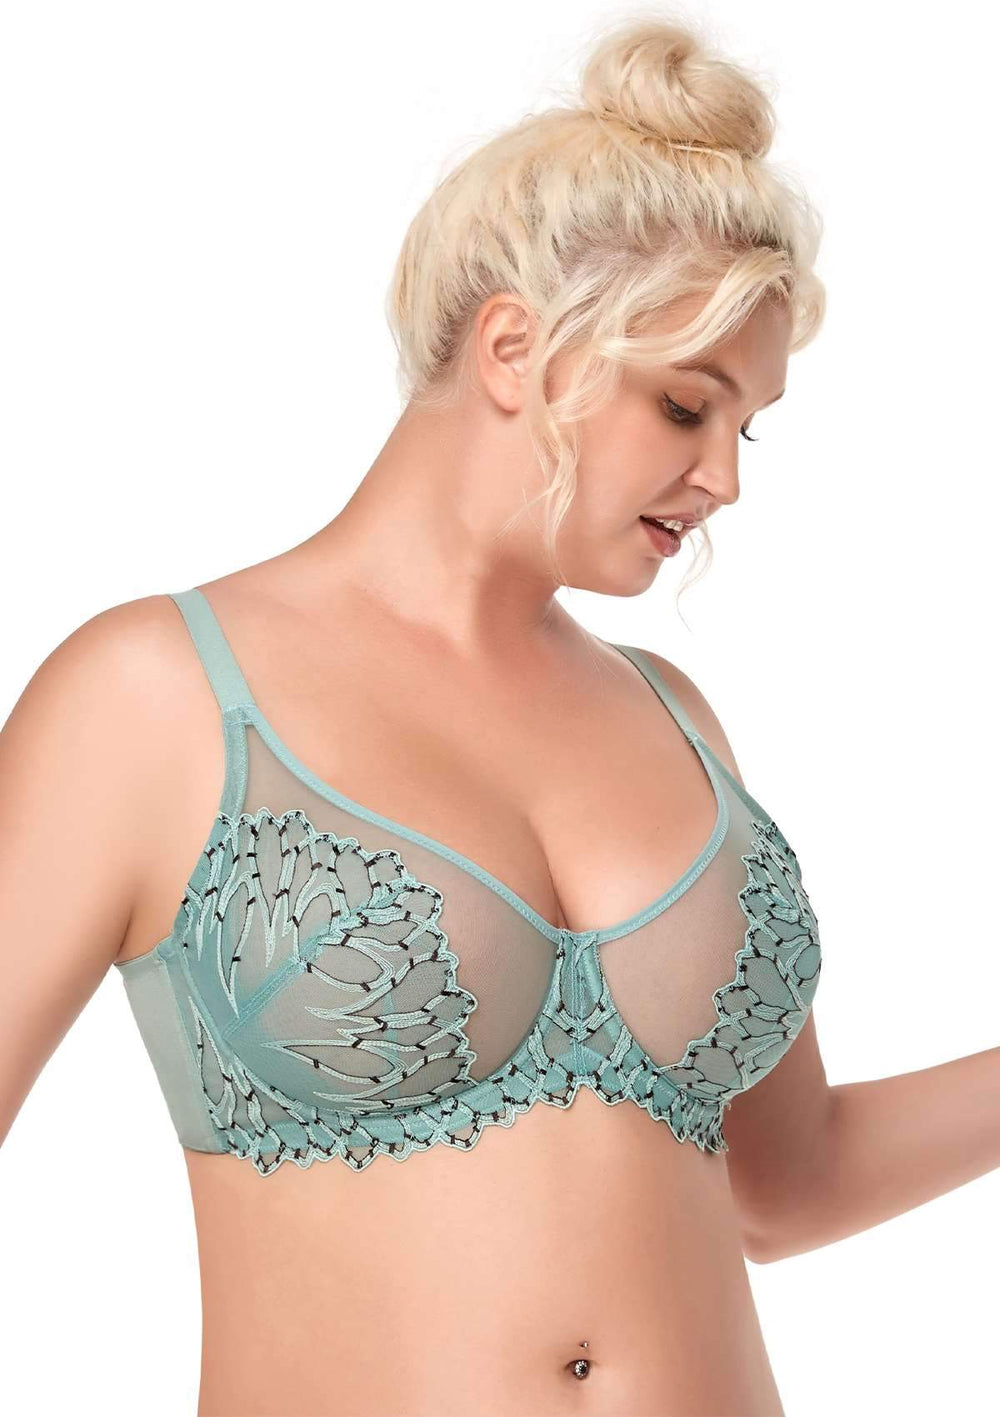 Bras for Women No Underwire Sexy Lace Bra for Womens Underwire Bra Lace  Floral Bra Unlined Unlined Plus Size Full (Green, 42/95B)